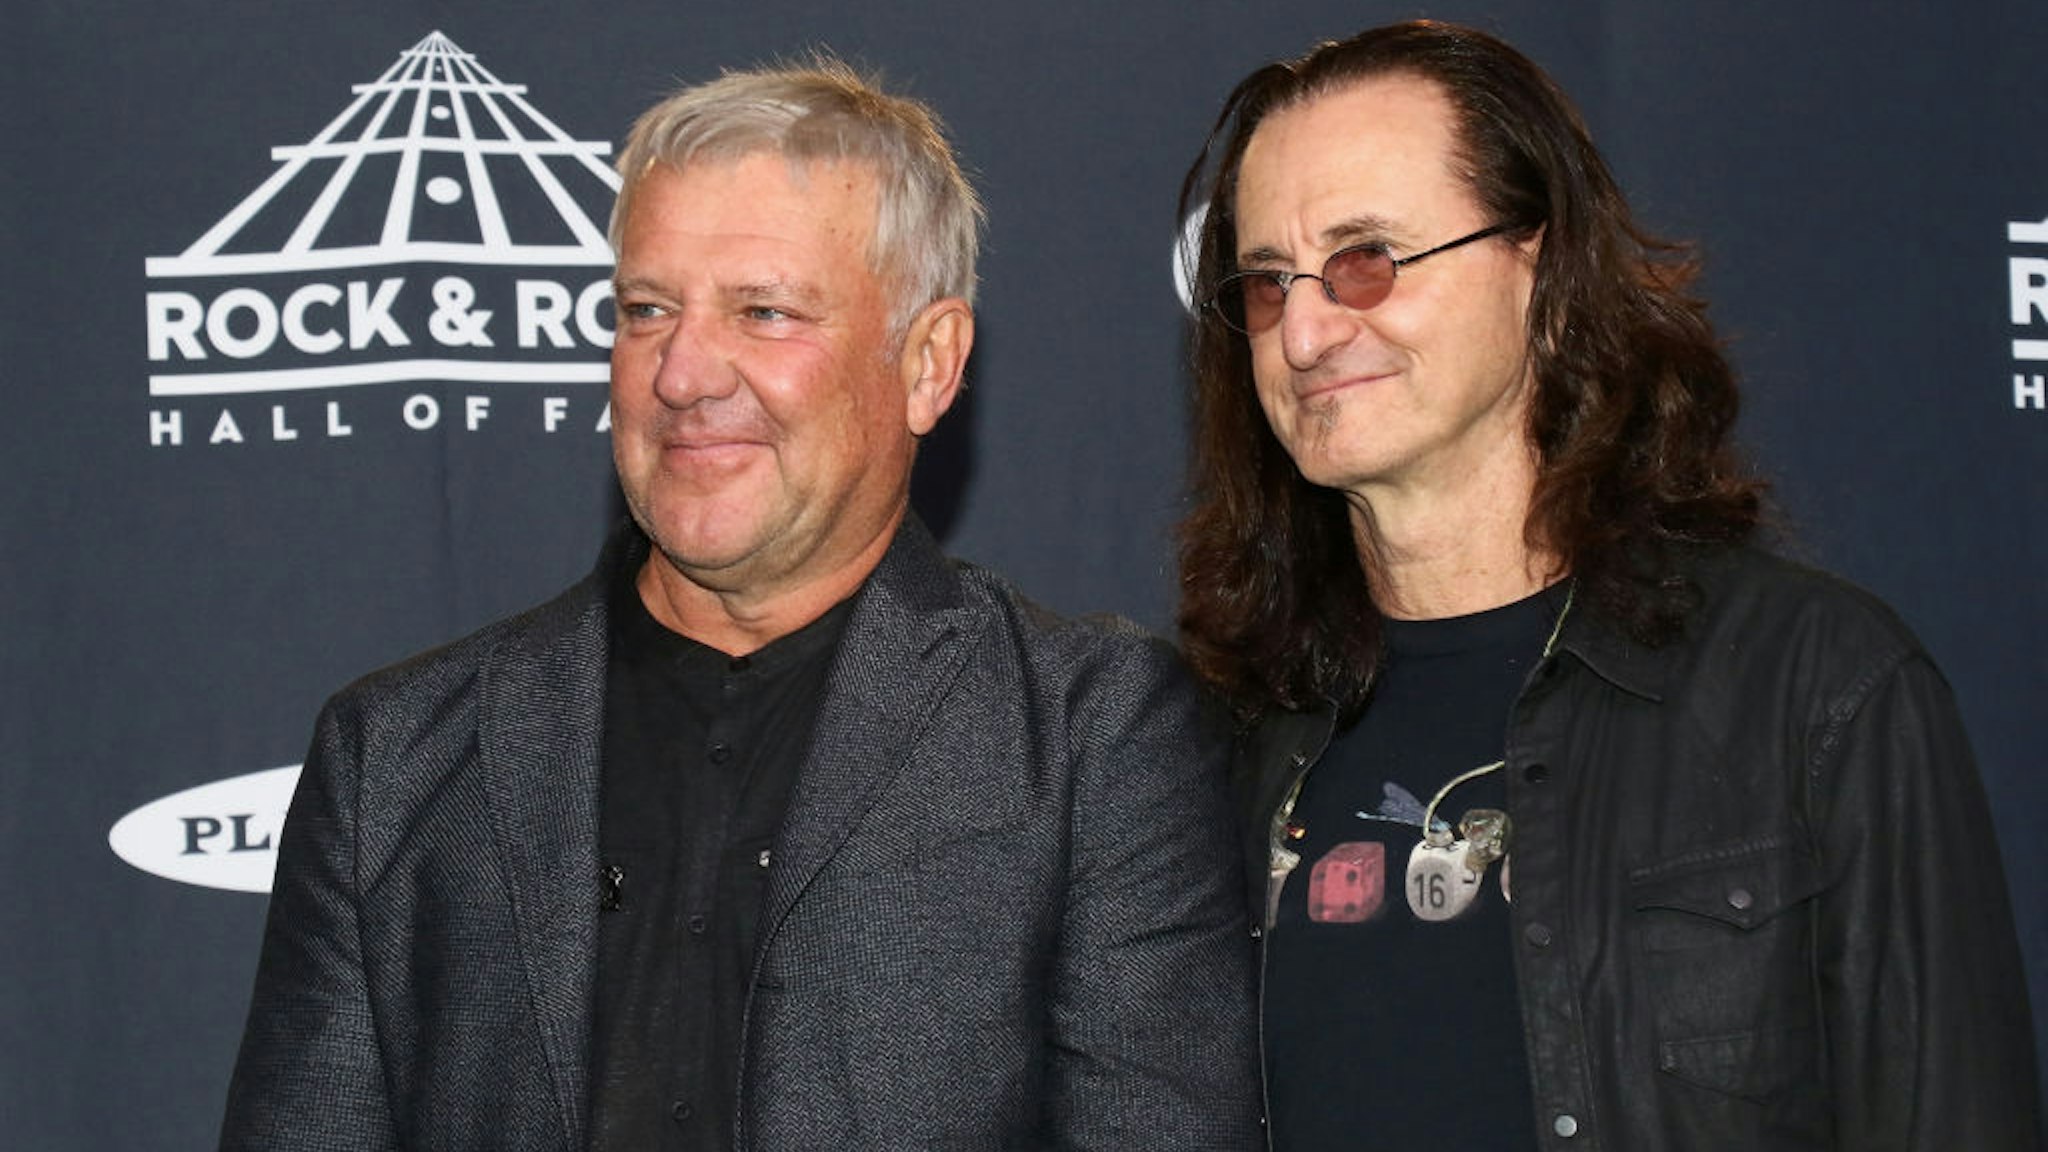 Alex Lifeson and Geddy Lee of Rush are out with their own brand of beer.